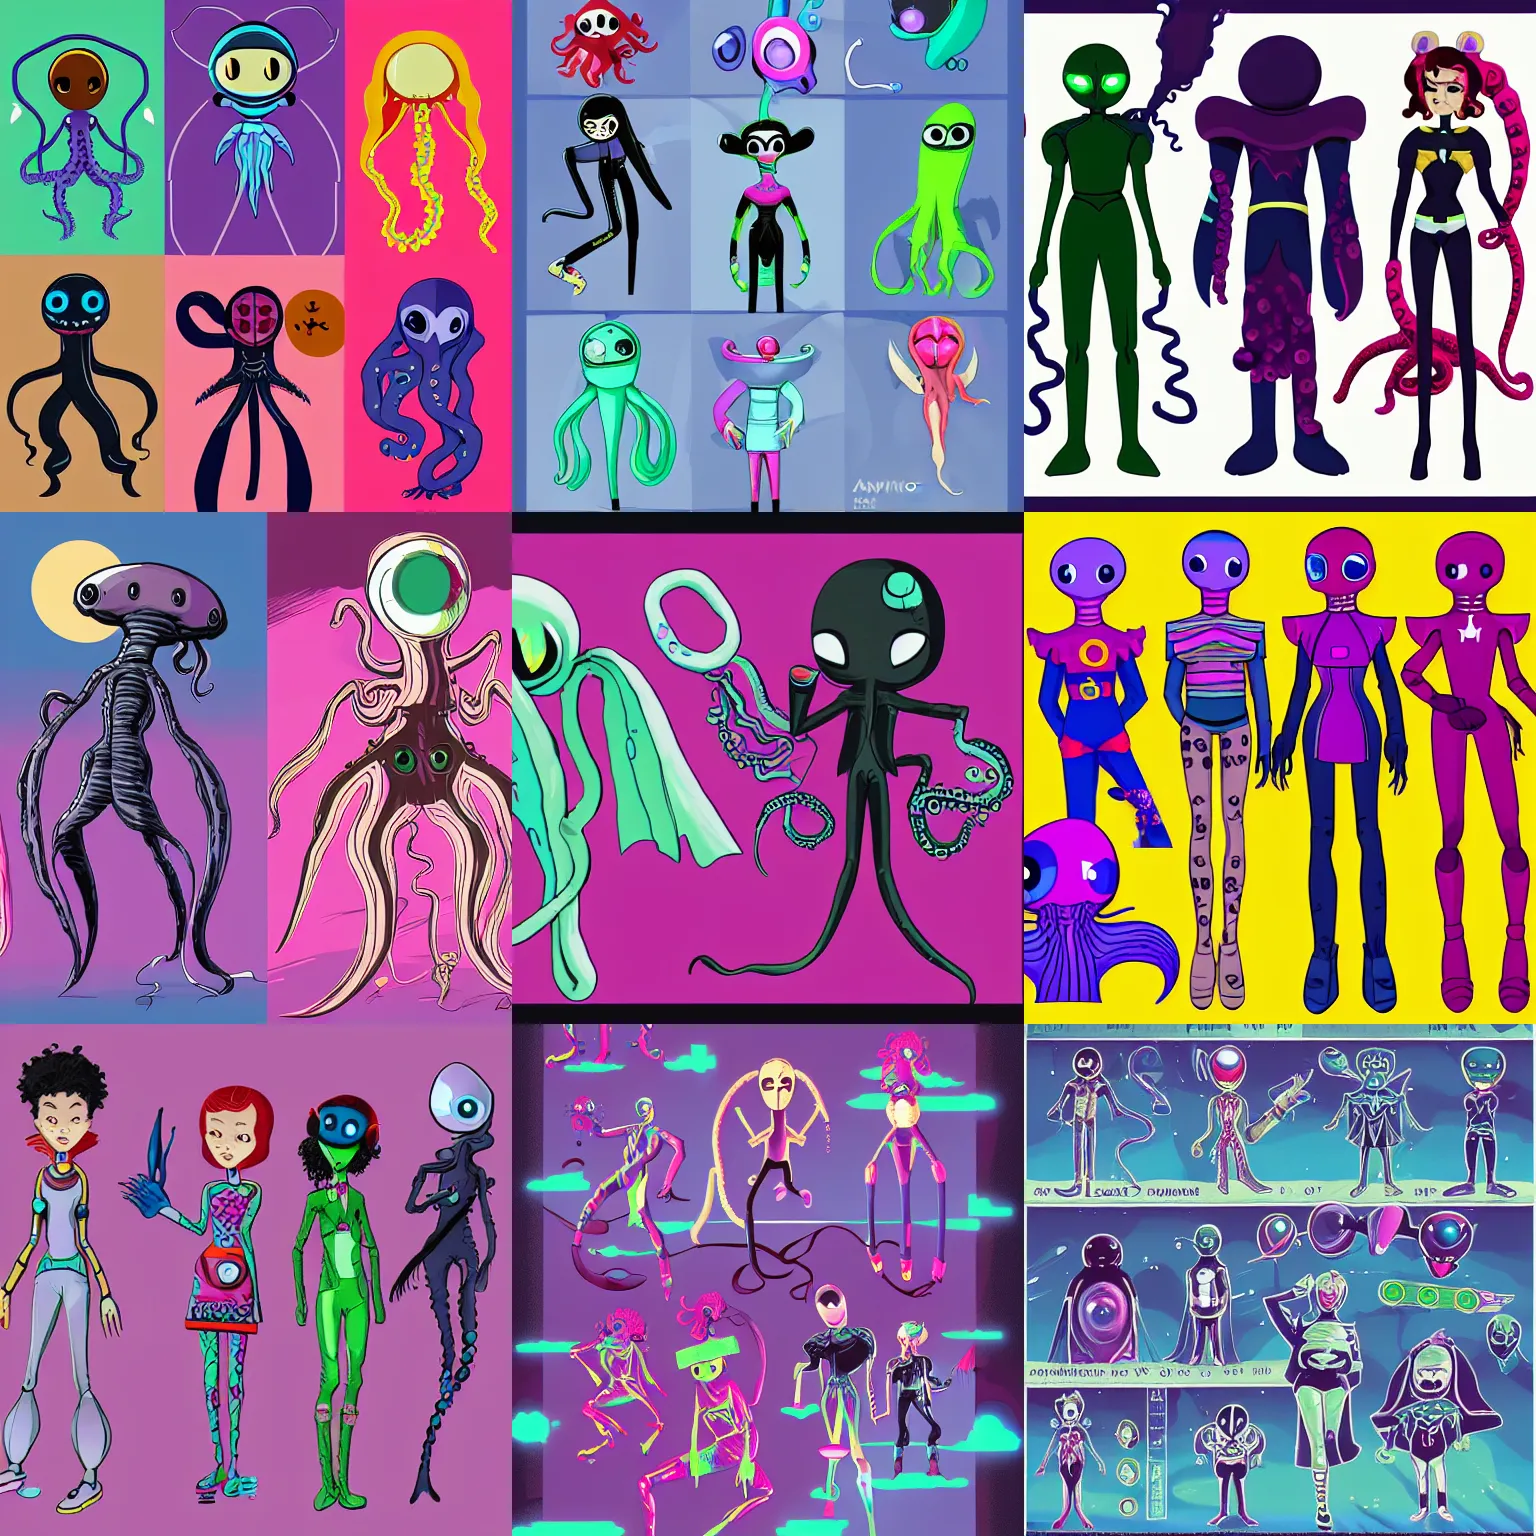 Prompt: an adorable vintage vaporwave colorful tall lean vampire ninja aliens with big black alien eyes and a squid beak with three webbed tentacle arms and skinny thin human legs inspired as playable characters design sheets that focuses on an ocean setting with help from the artists of odd world inhabitants inc and Lauren faust from her work on dc superhero girls and lead artist Andy Suriano from rise of the teenage mutant ninja turtles on nickelodeon using artistic cues for the game fret nice and art direction from the Sony 2018 animated film spiderverse